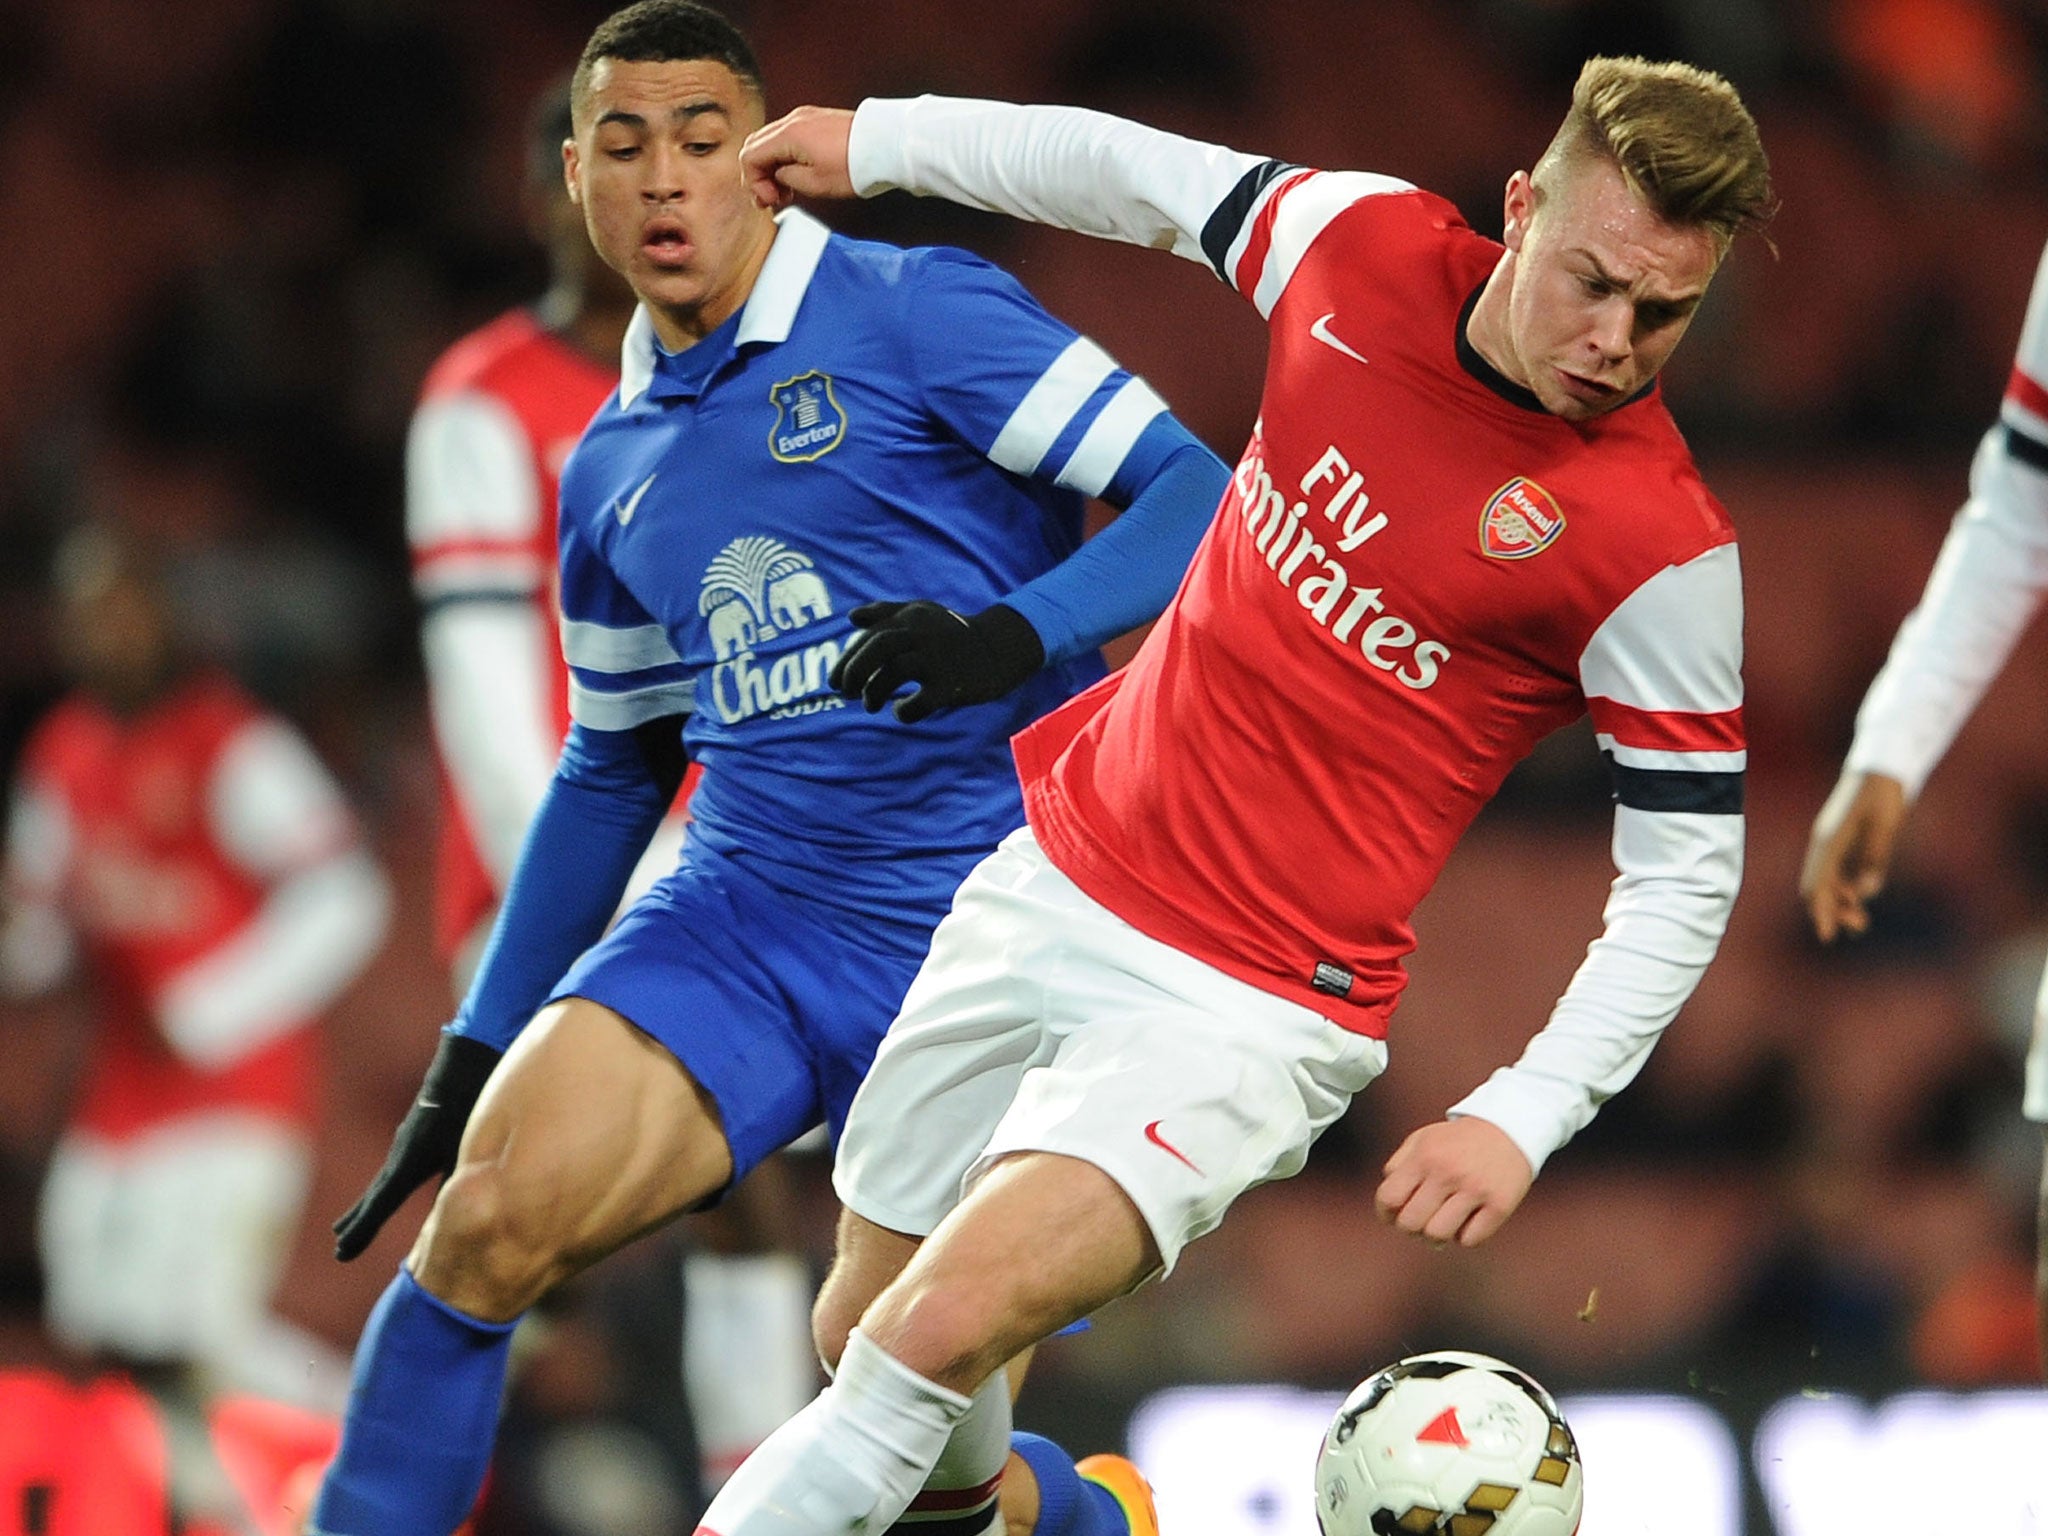 Jack Jebb (right) fends off Everton's Courtney Duffus during Arsenal's 3-1 FA Youth Cup quarter-final win at the Emirates Stadium